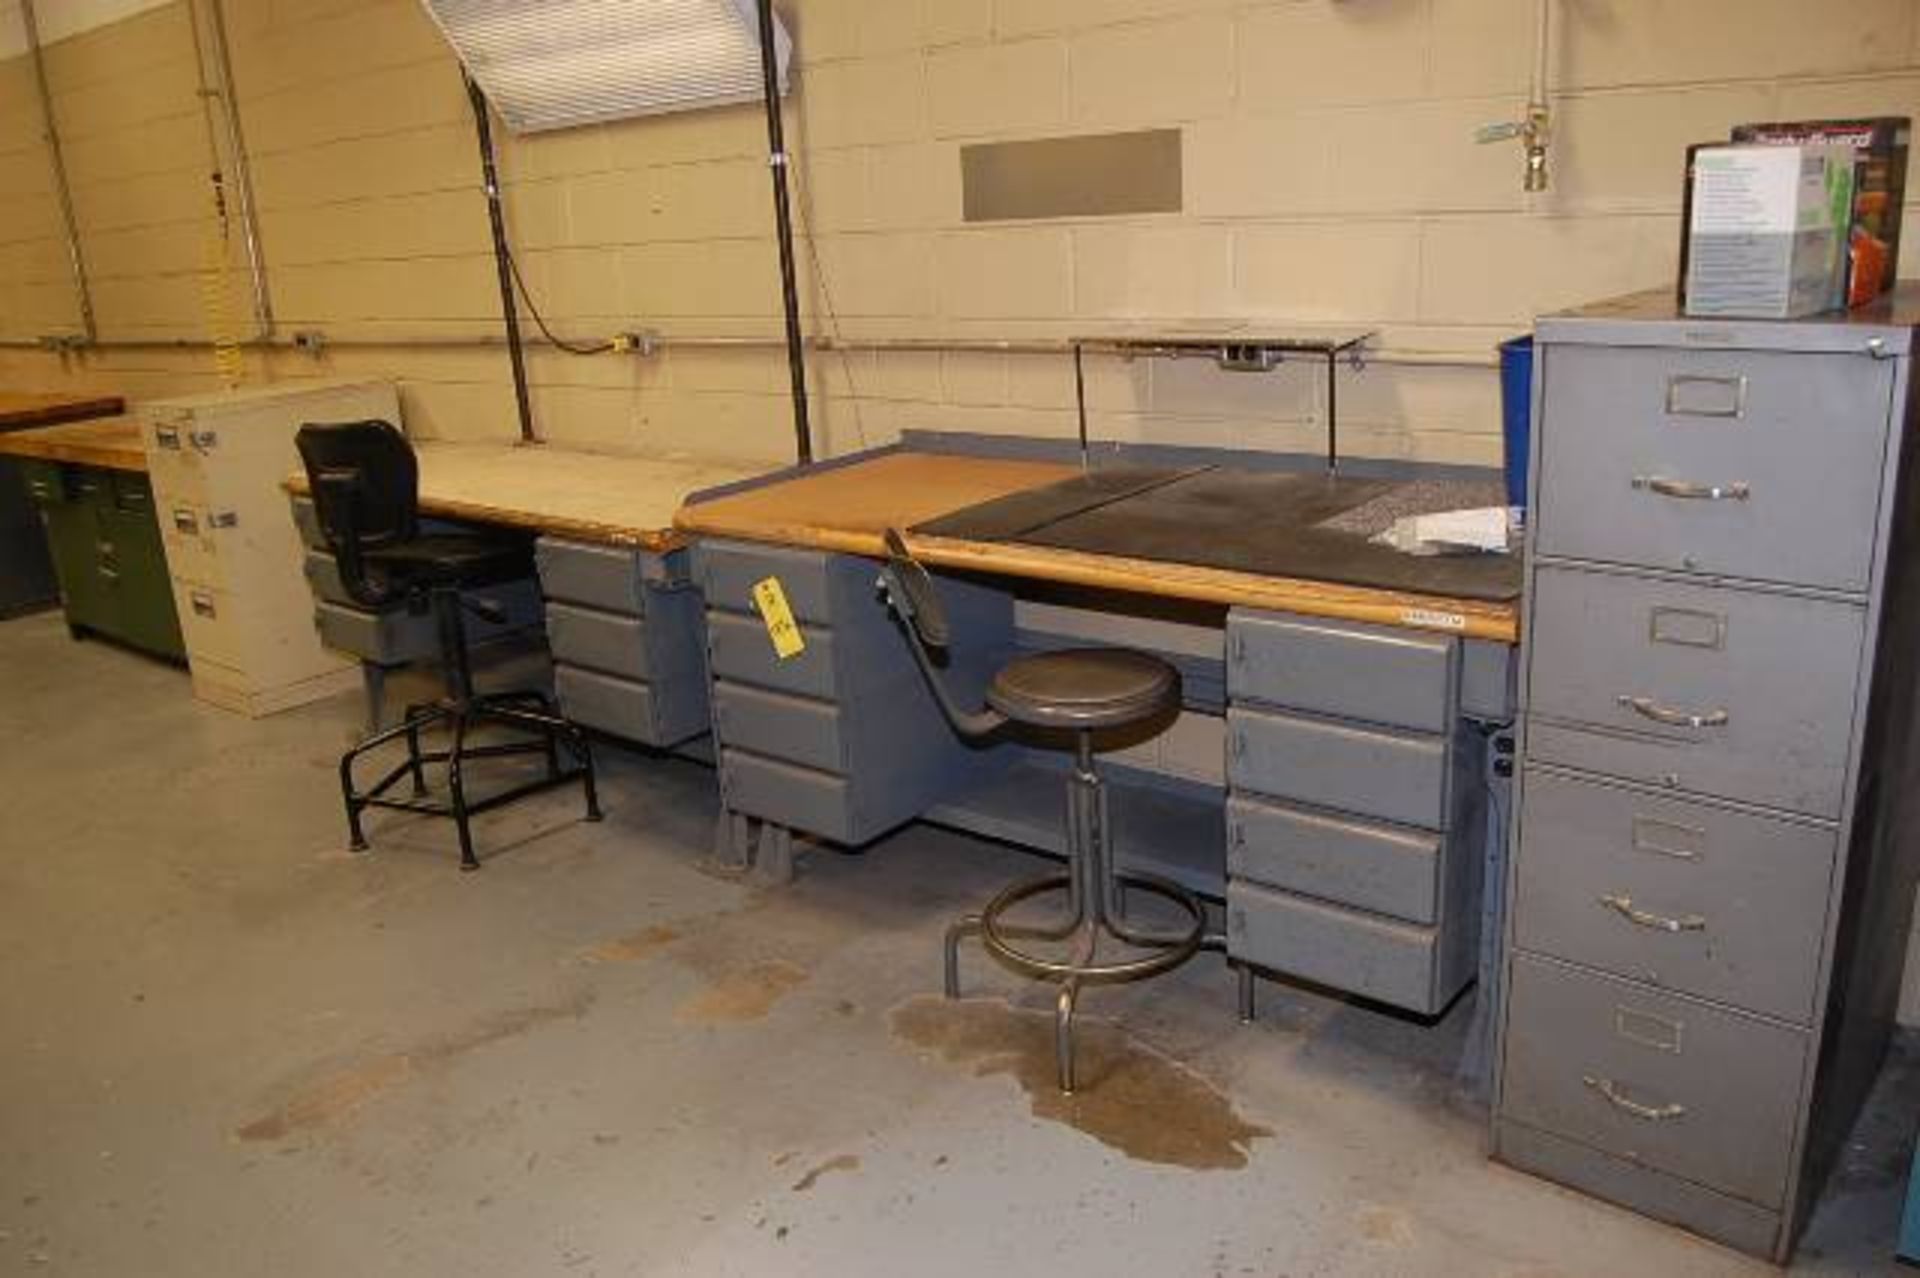 Shop Support Items - Assorted, (13) Work Tables, (3) Hallowell Locker Units, (10) File Cabinets